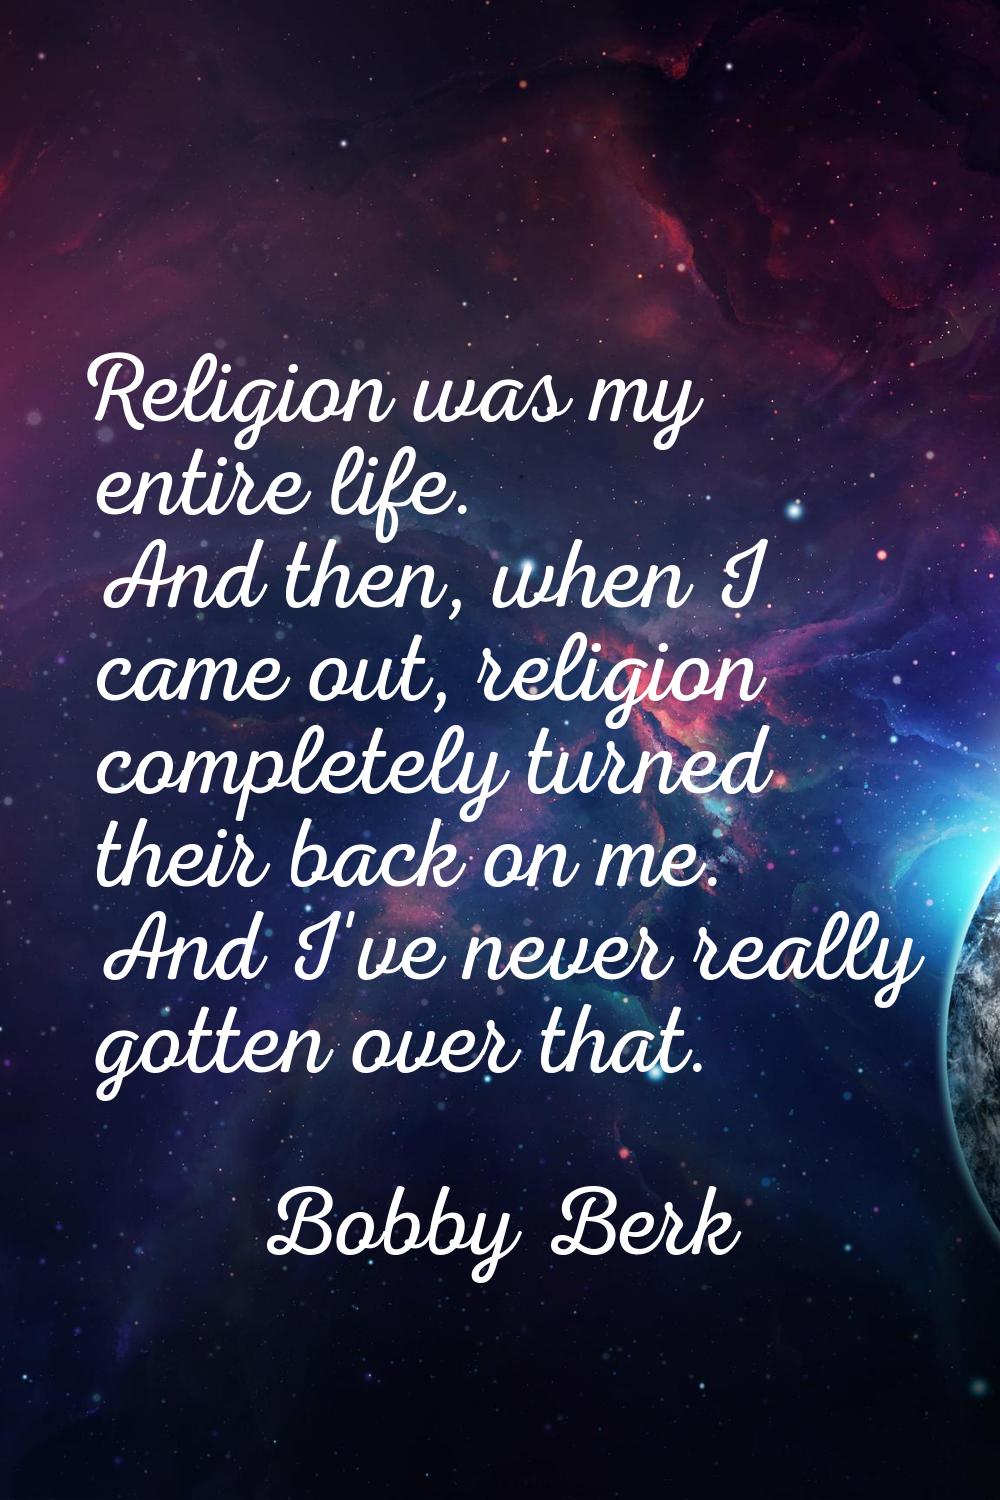 Religion was my entire life. And then, when I came out, religion completely turned their back on me